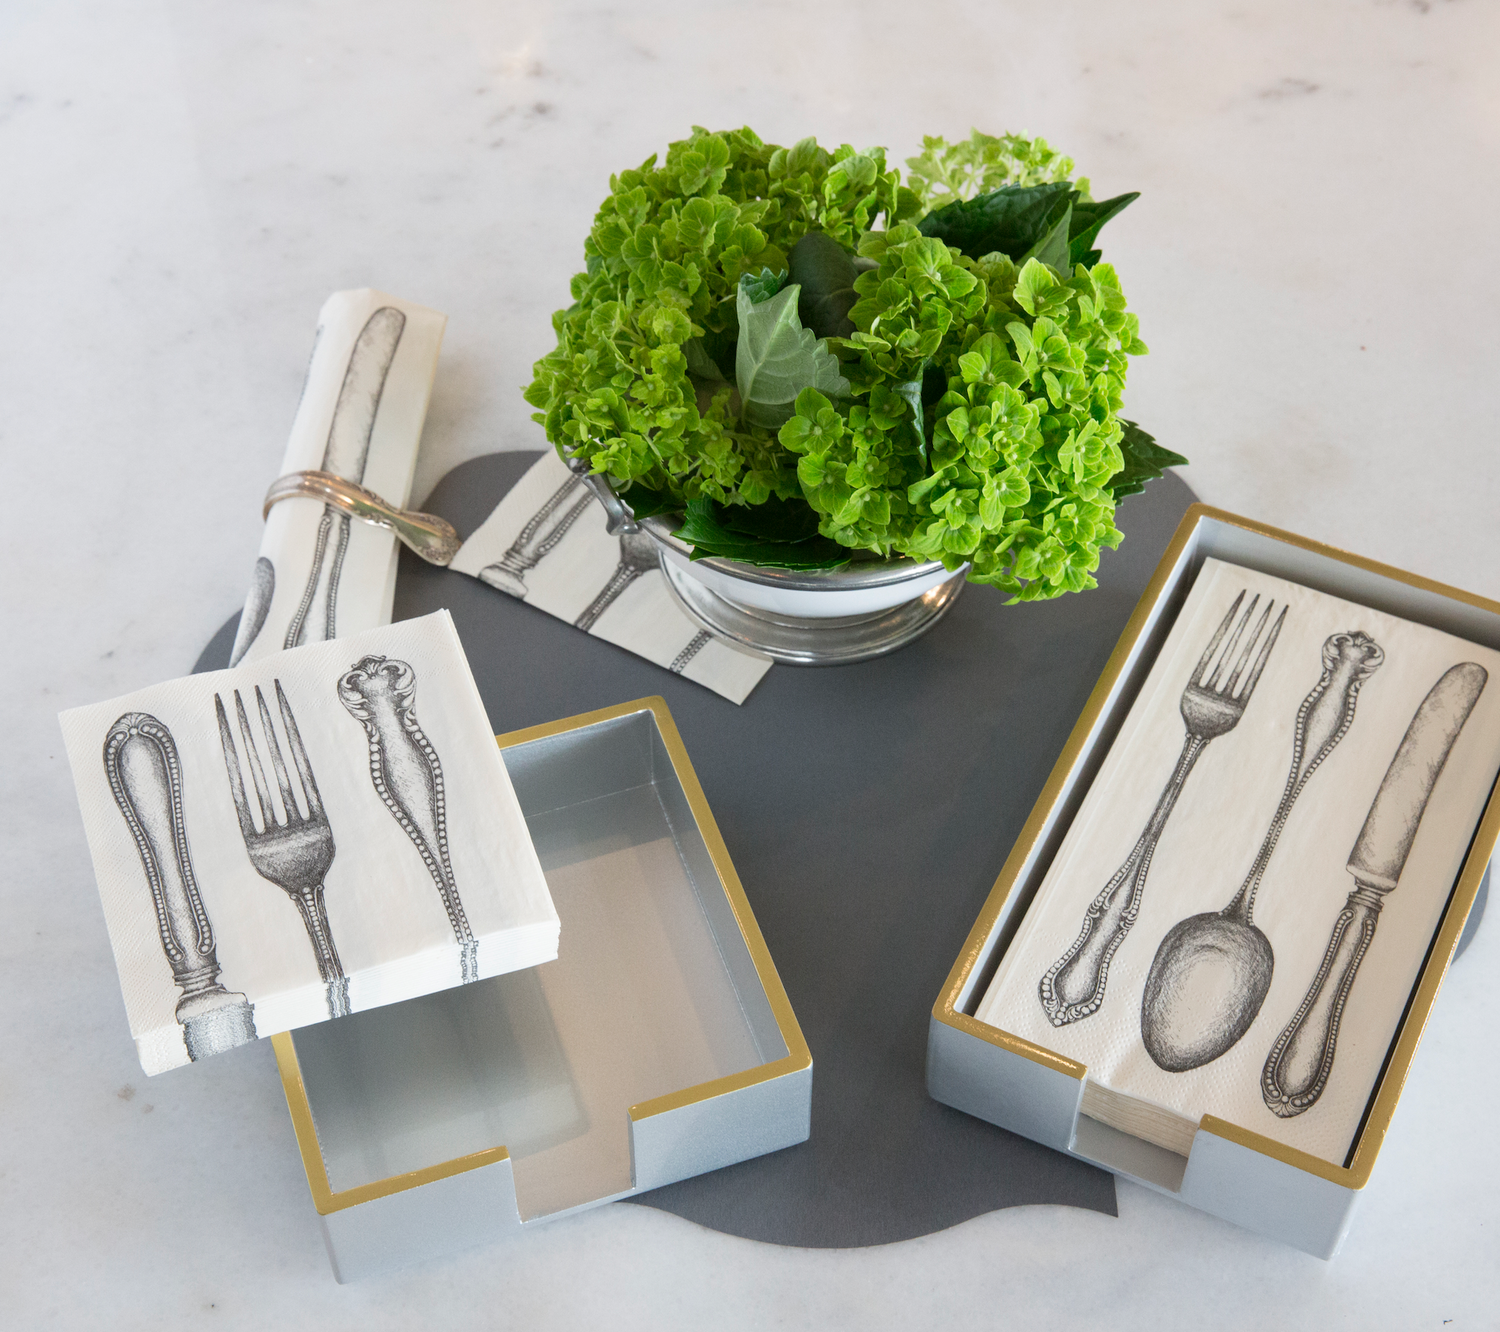 This Hester &amp; Cook Classic Cutlery Napkin holder is perfect for table setting and party decorations. It adds a touch of elegance and convenience to any gathering. Pair it with our Classic Cutlery Napkins.